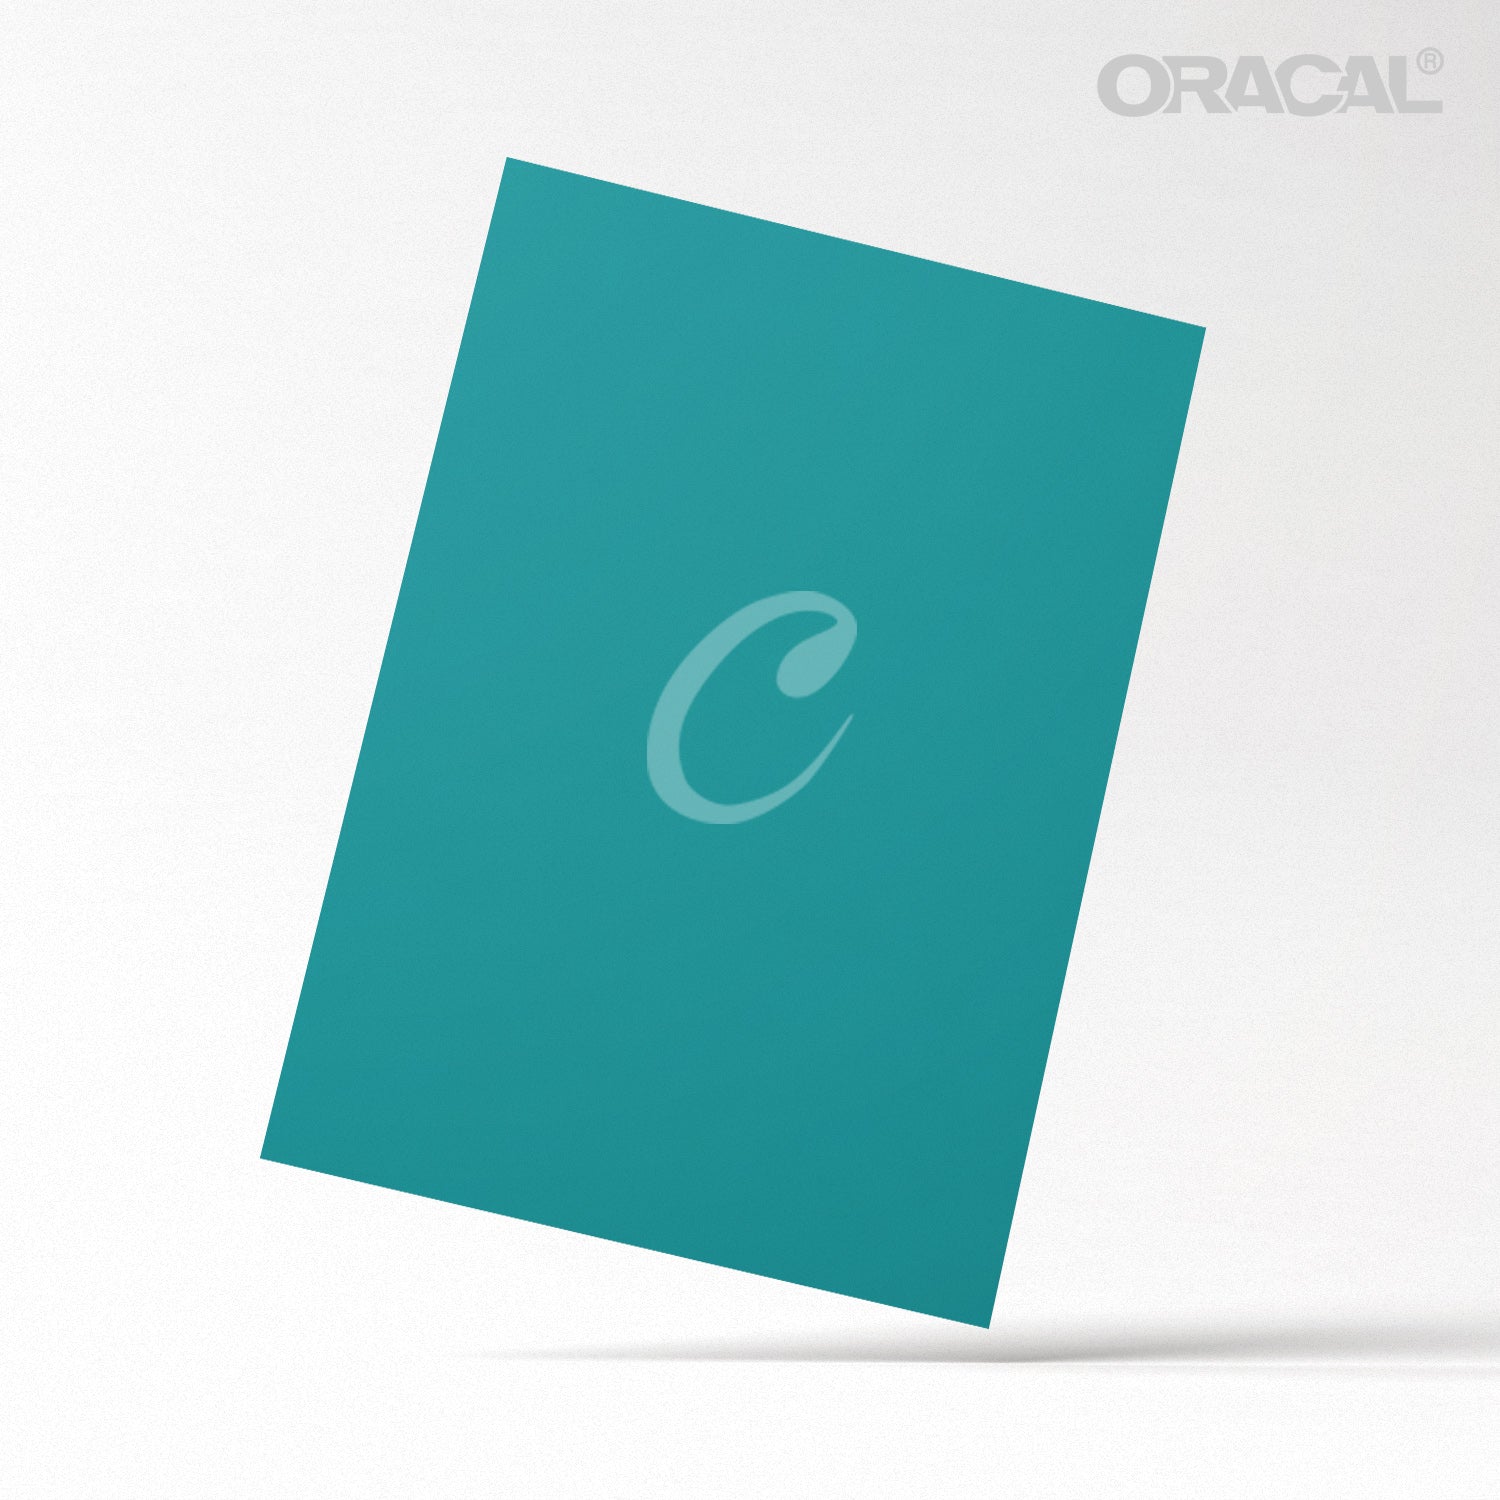 Oracal Turquoise Blue